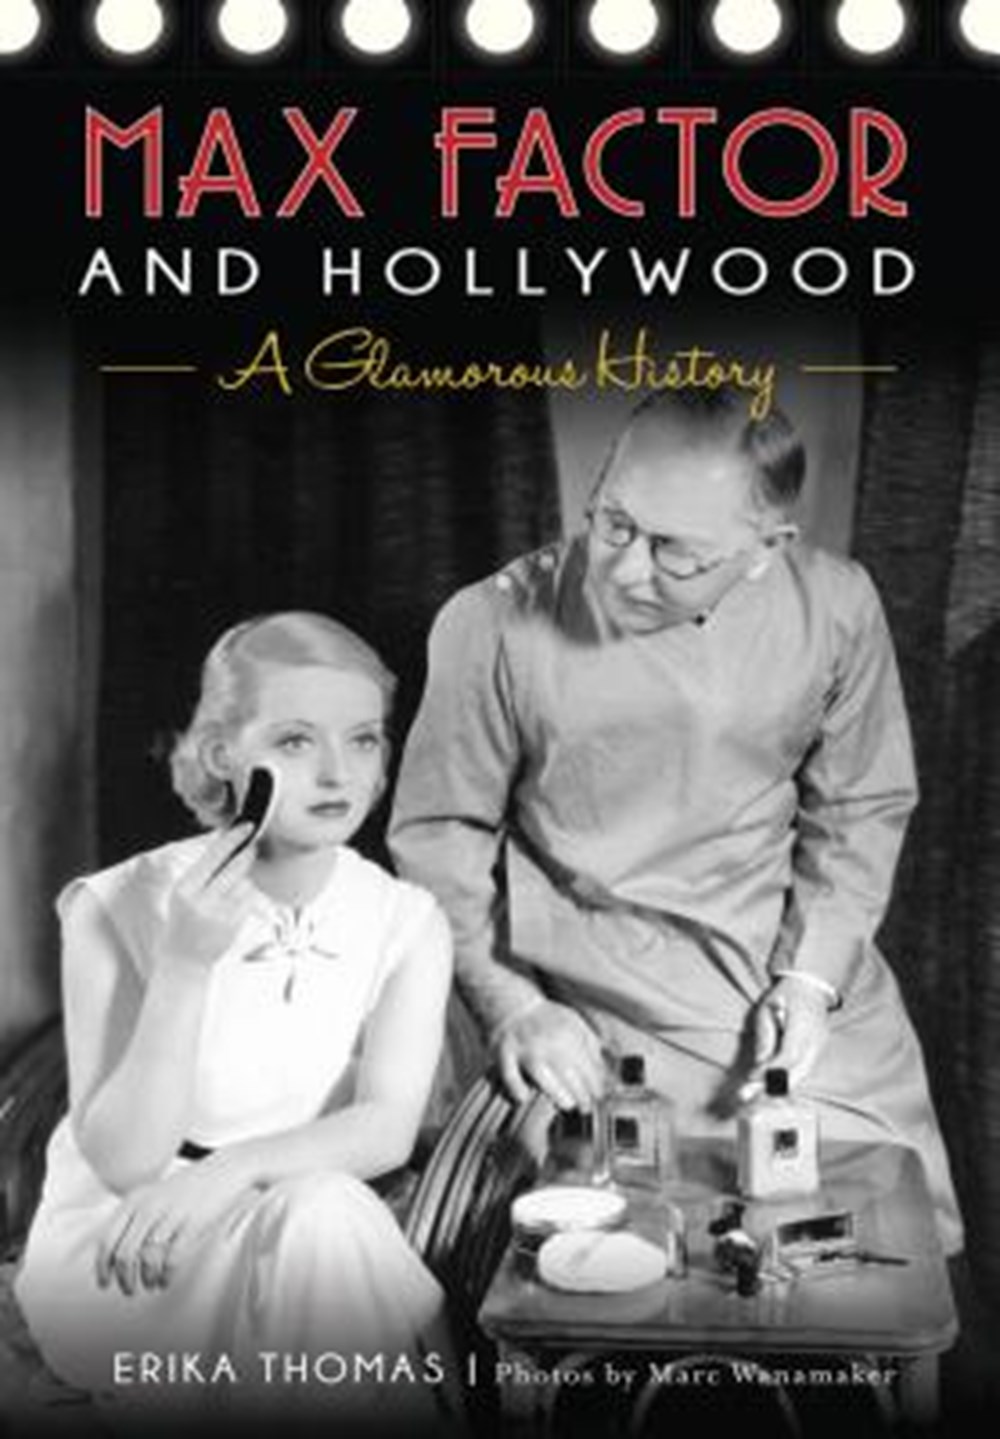 Max Factor and Hollywood A Glamorous History